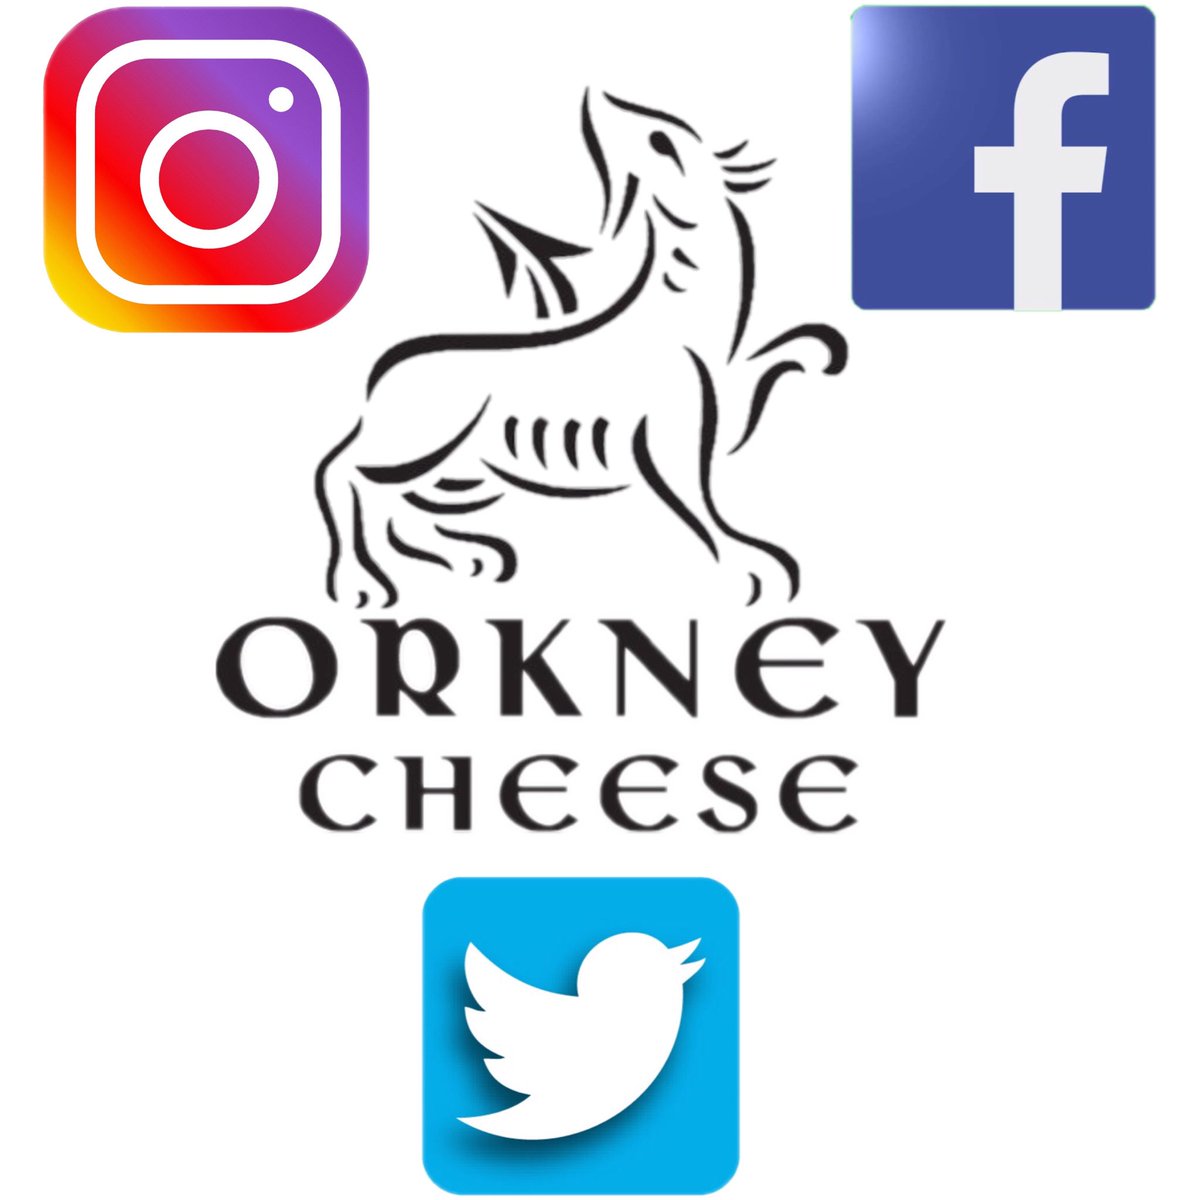 You can follow us on Instagram instagram.com/orkney_cheese Twitter x.com/orkneycheese Facebook m.facebook.com/orkneycheese/